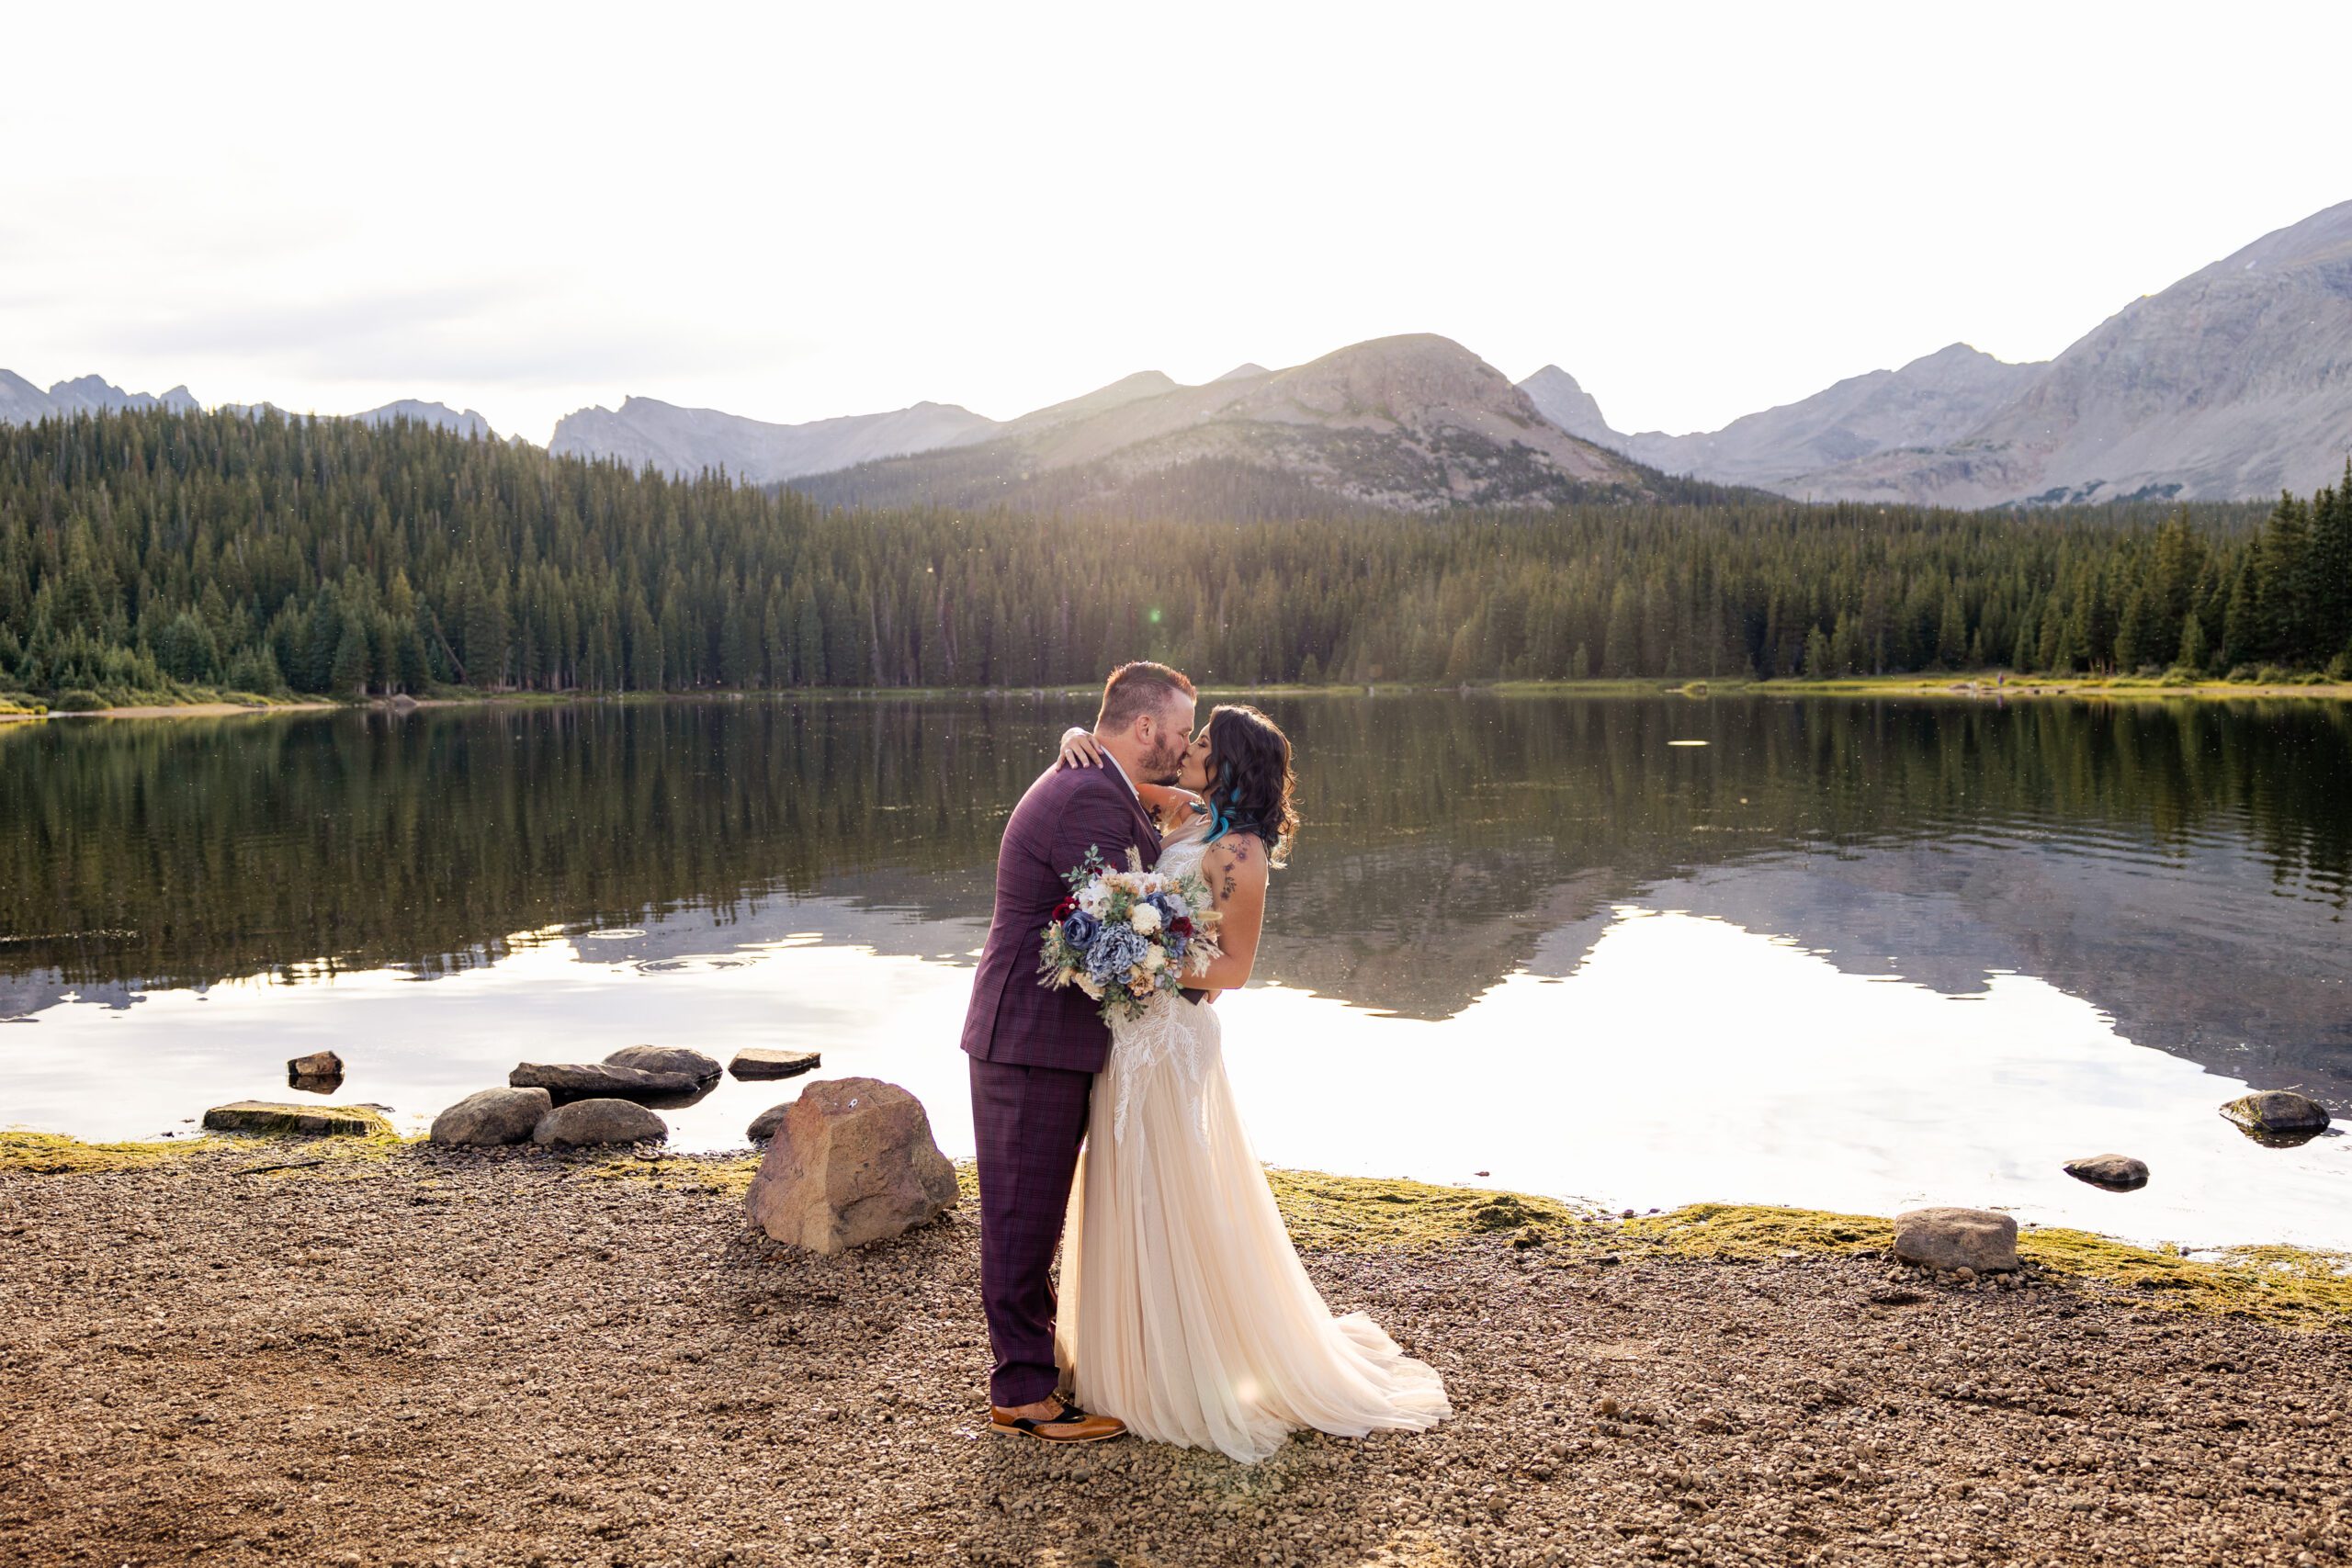 Their first kiss as husband and wife after their Brainard Lake Elopement.